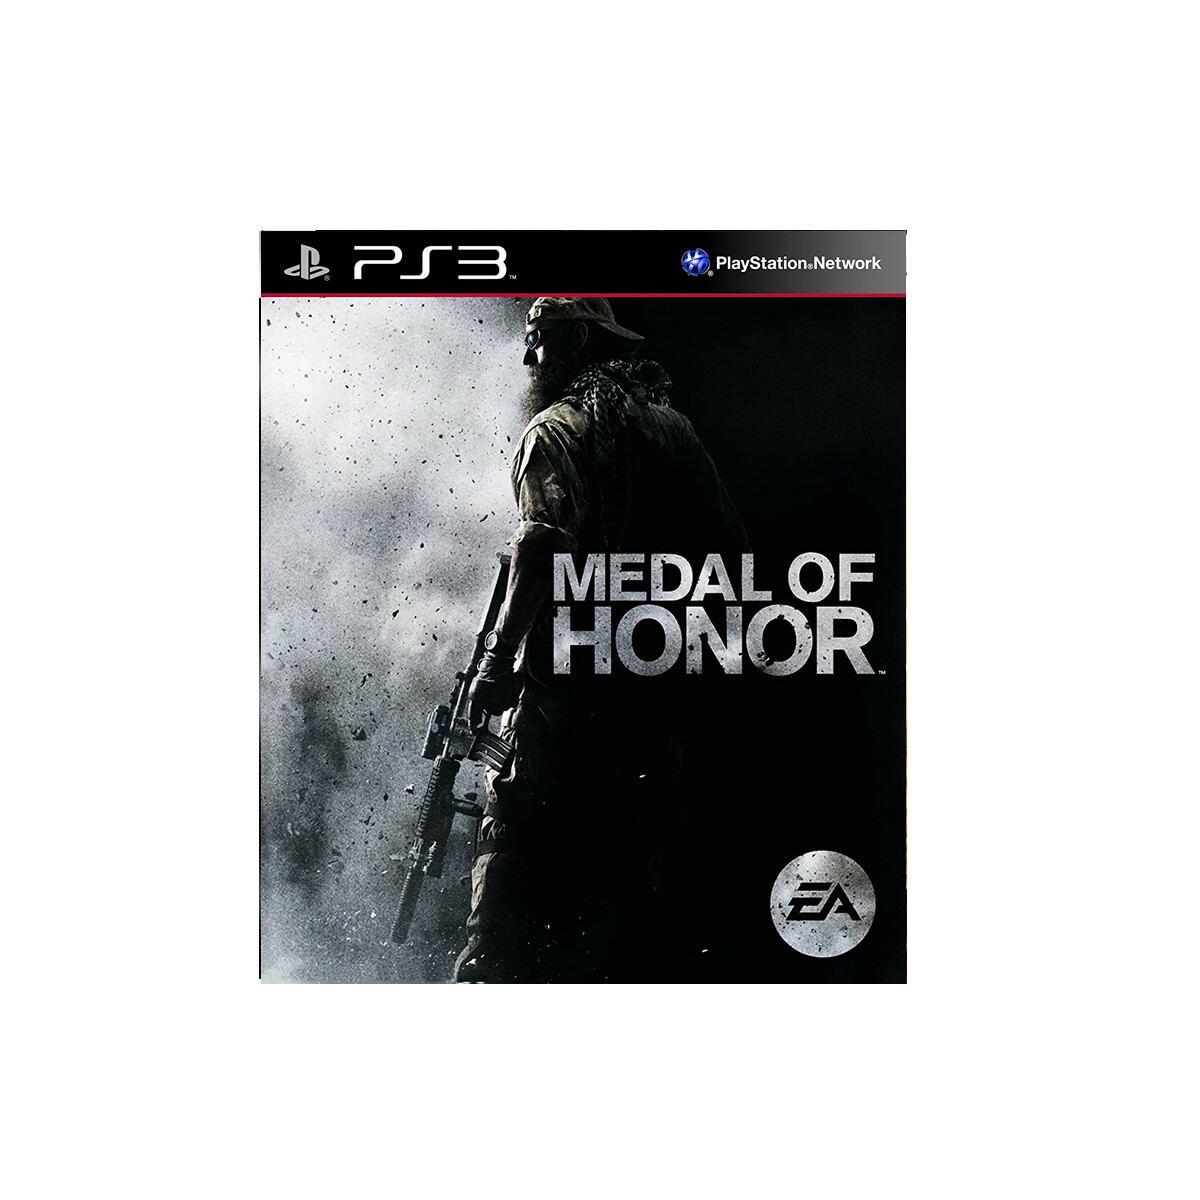 PS3 MEDAL OF HONOR 